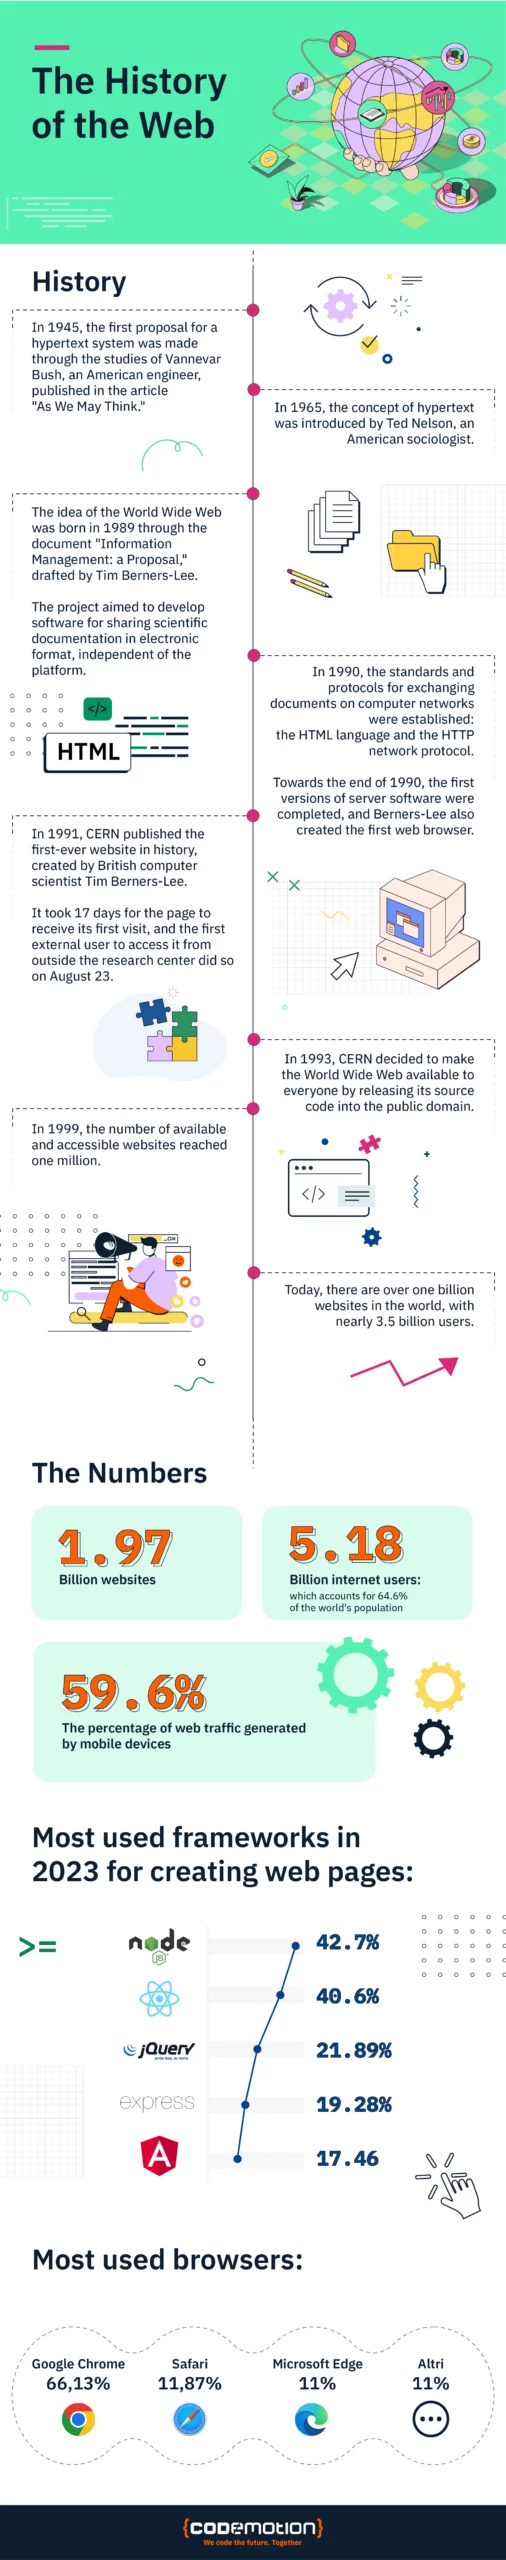 Infographic about the history of the web.